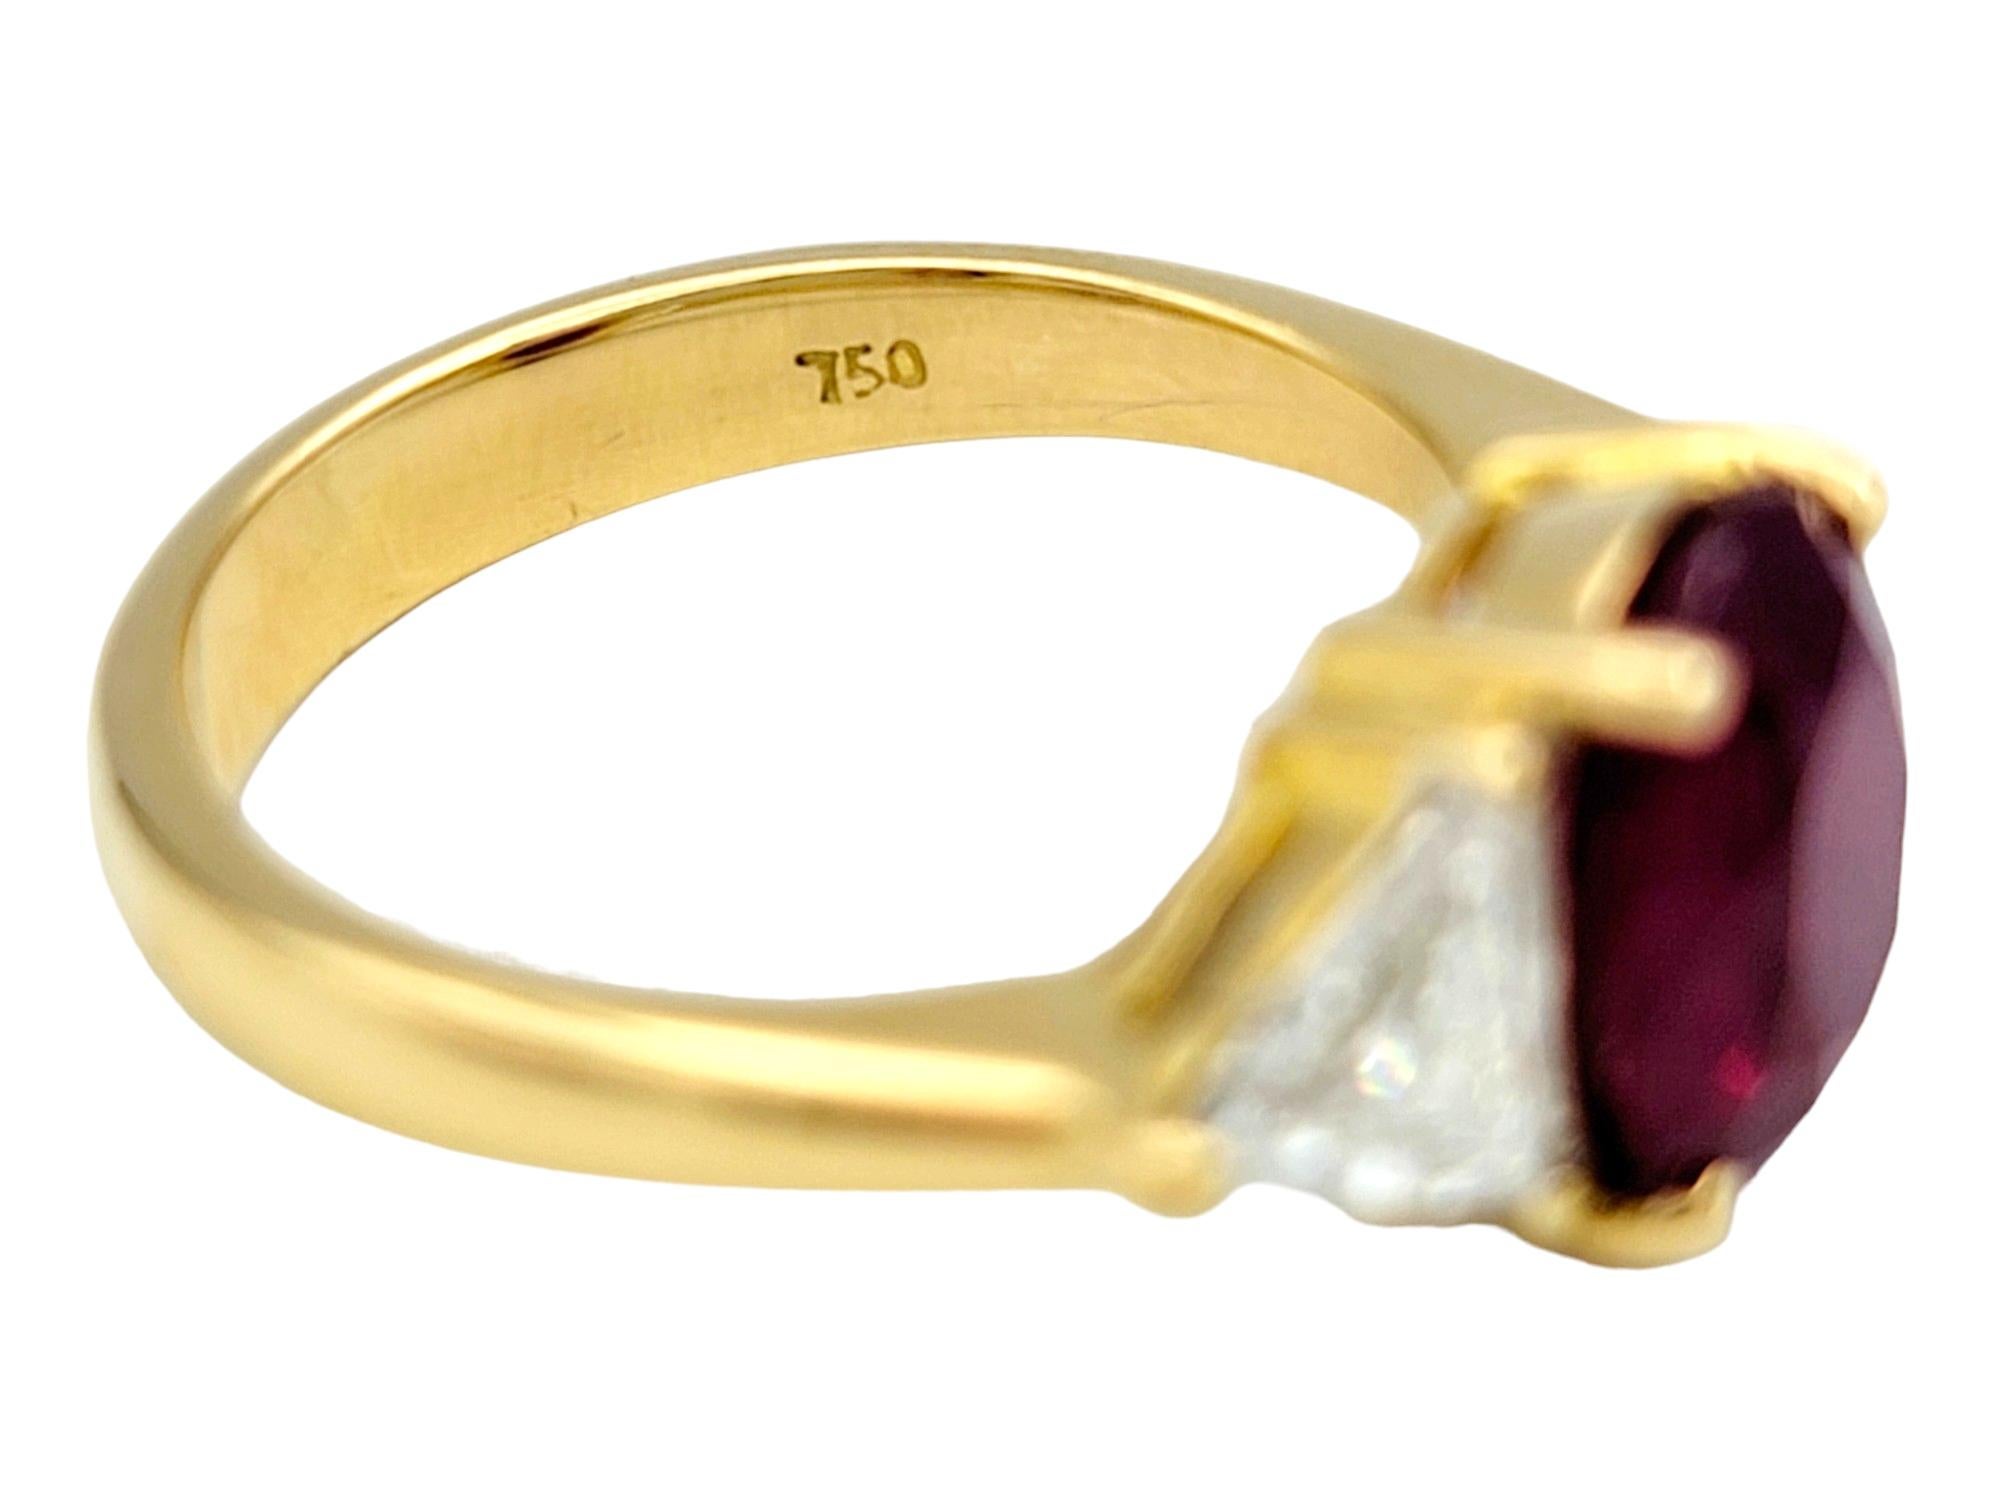 Rare Natural Oval Cut Burma Ruby and Trillion Diamond Ring 18 Karat Yellow Gold For Sale 2